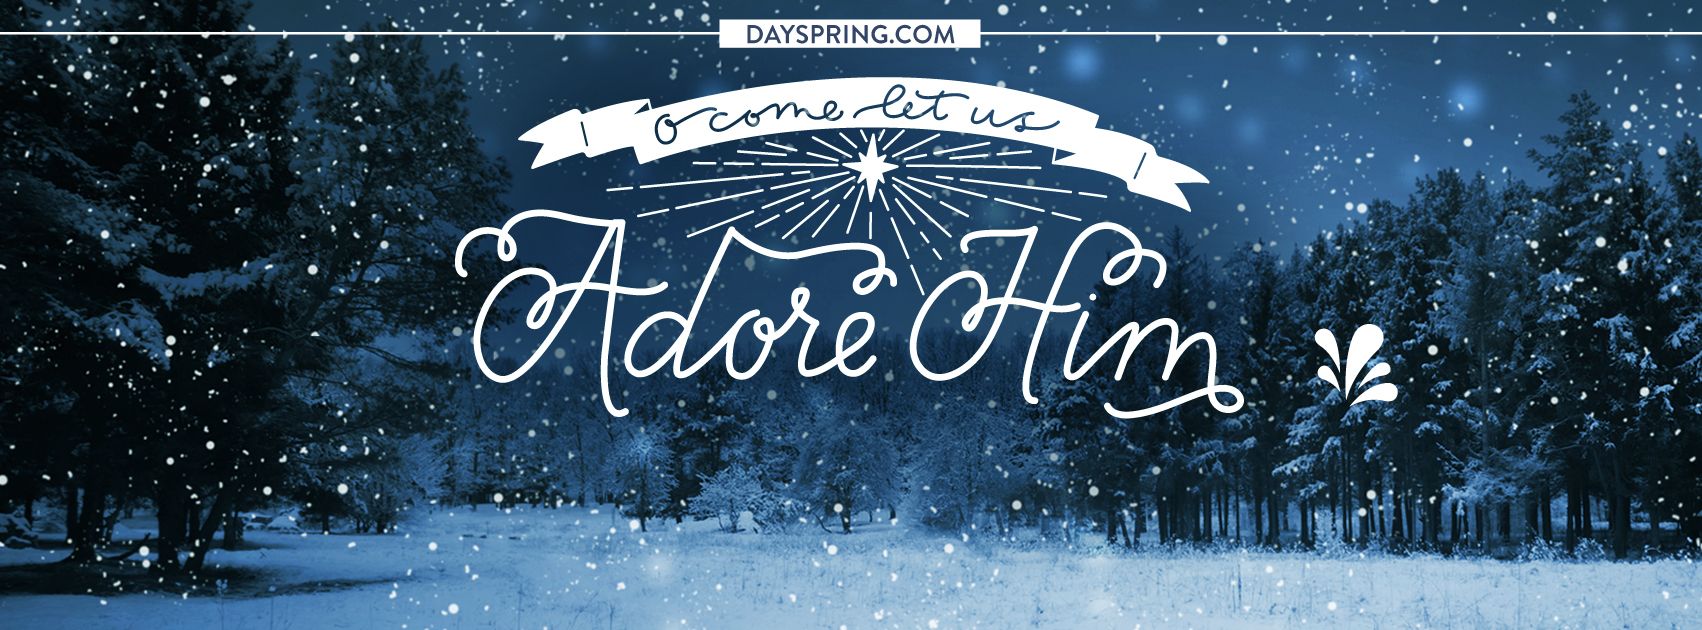 Facebook Cover Photo to Spice Up Your Profile for Christmas